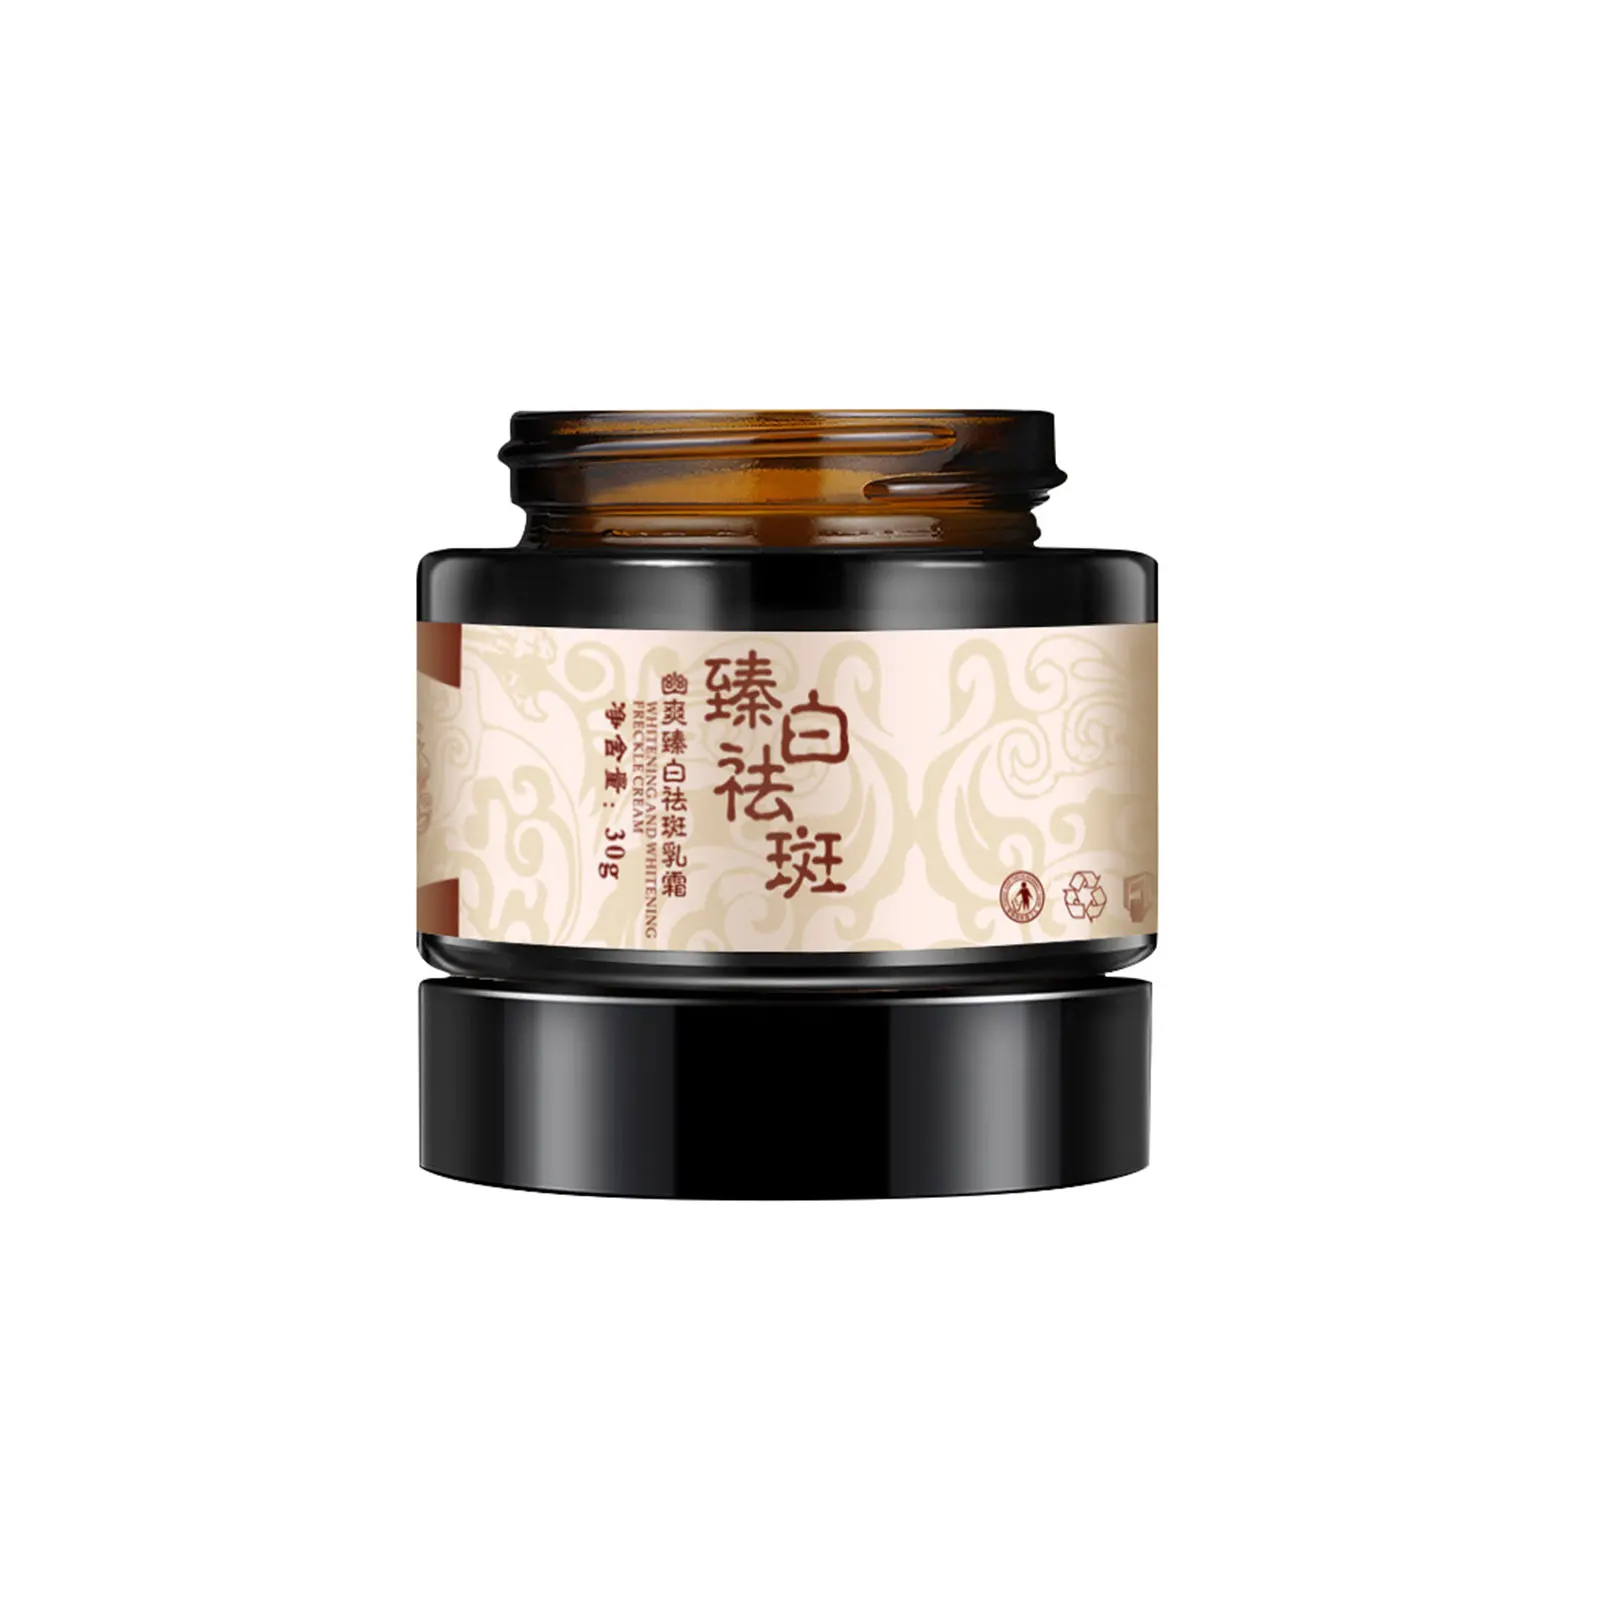 

Powerful Whitening Freckle Cream Chinese Herbal Plant Face Cream Remove Freckles And Dark Spots 30g Skin Whitening Cream